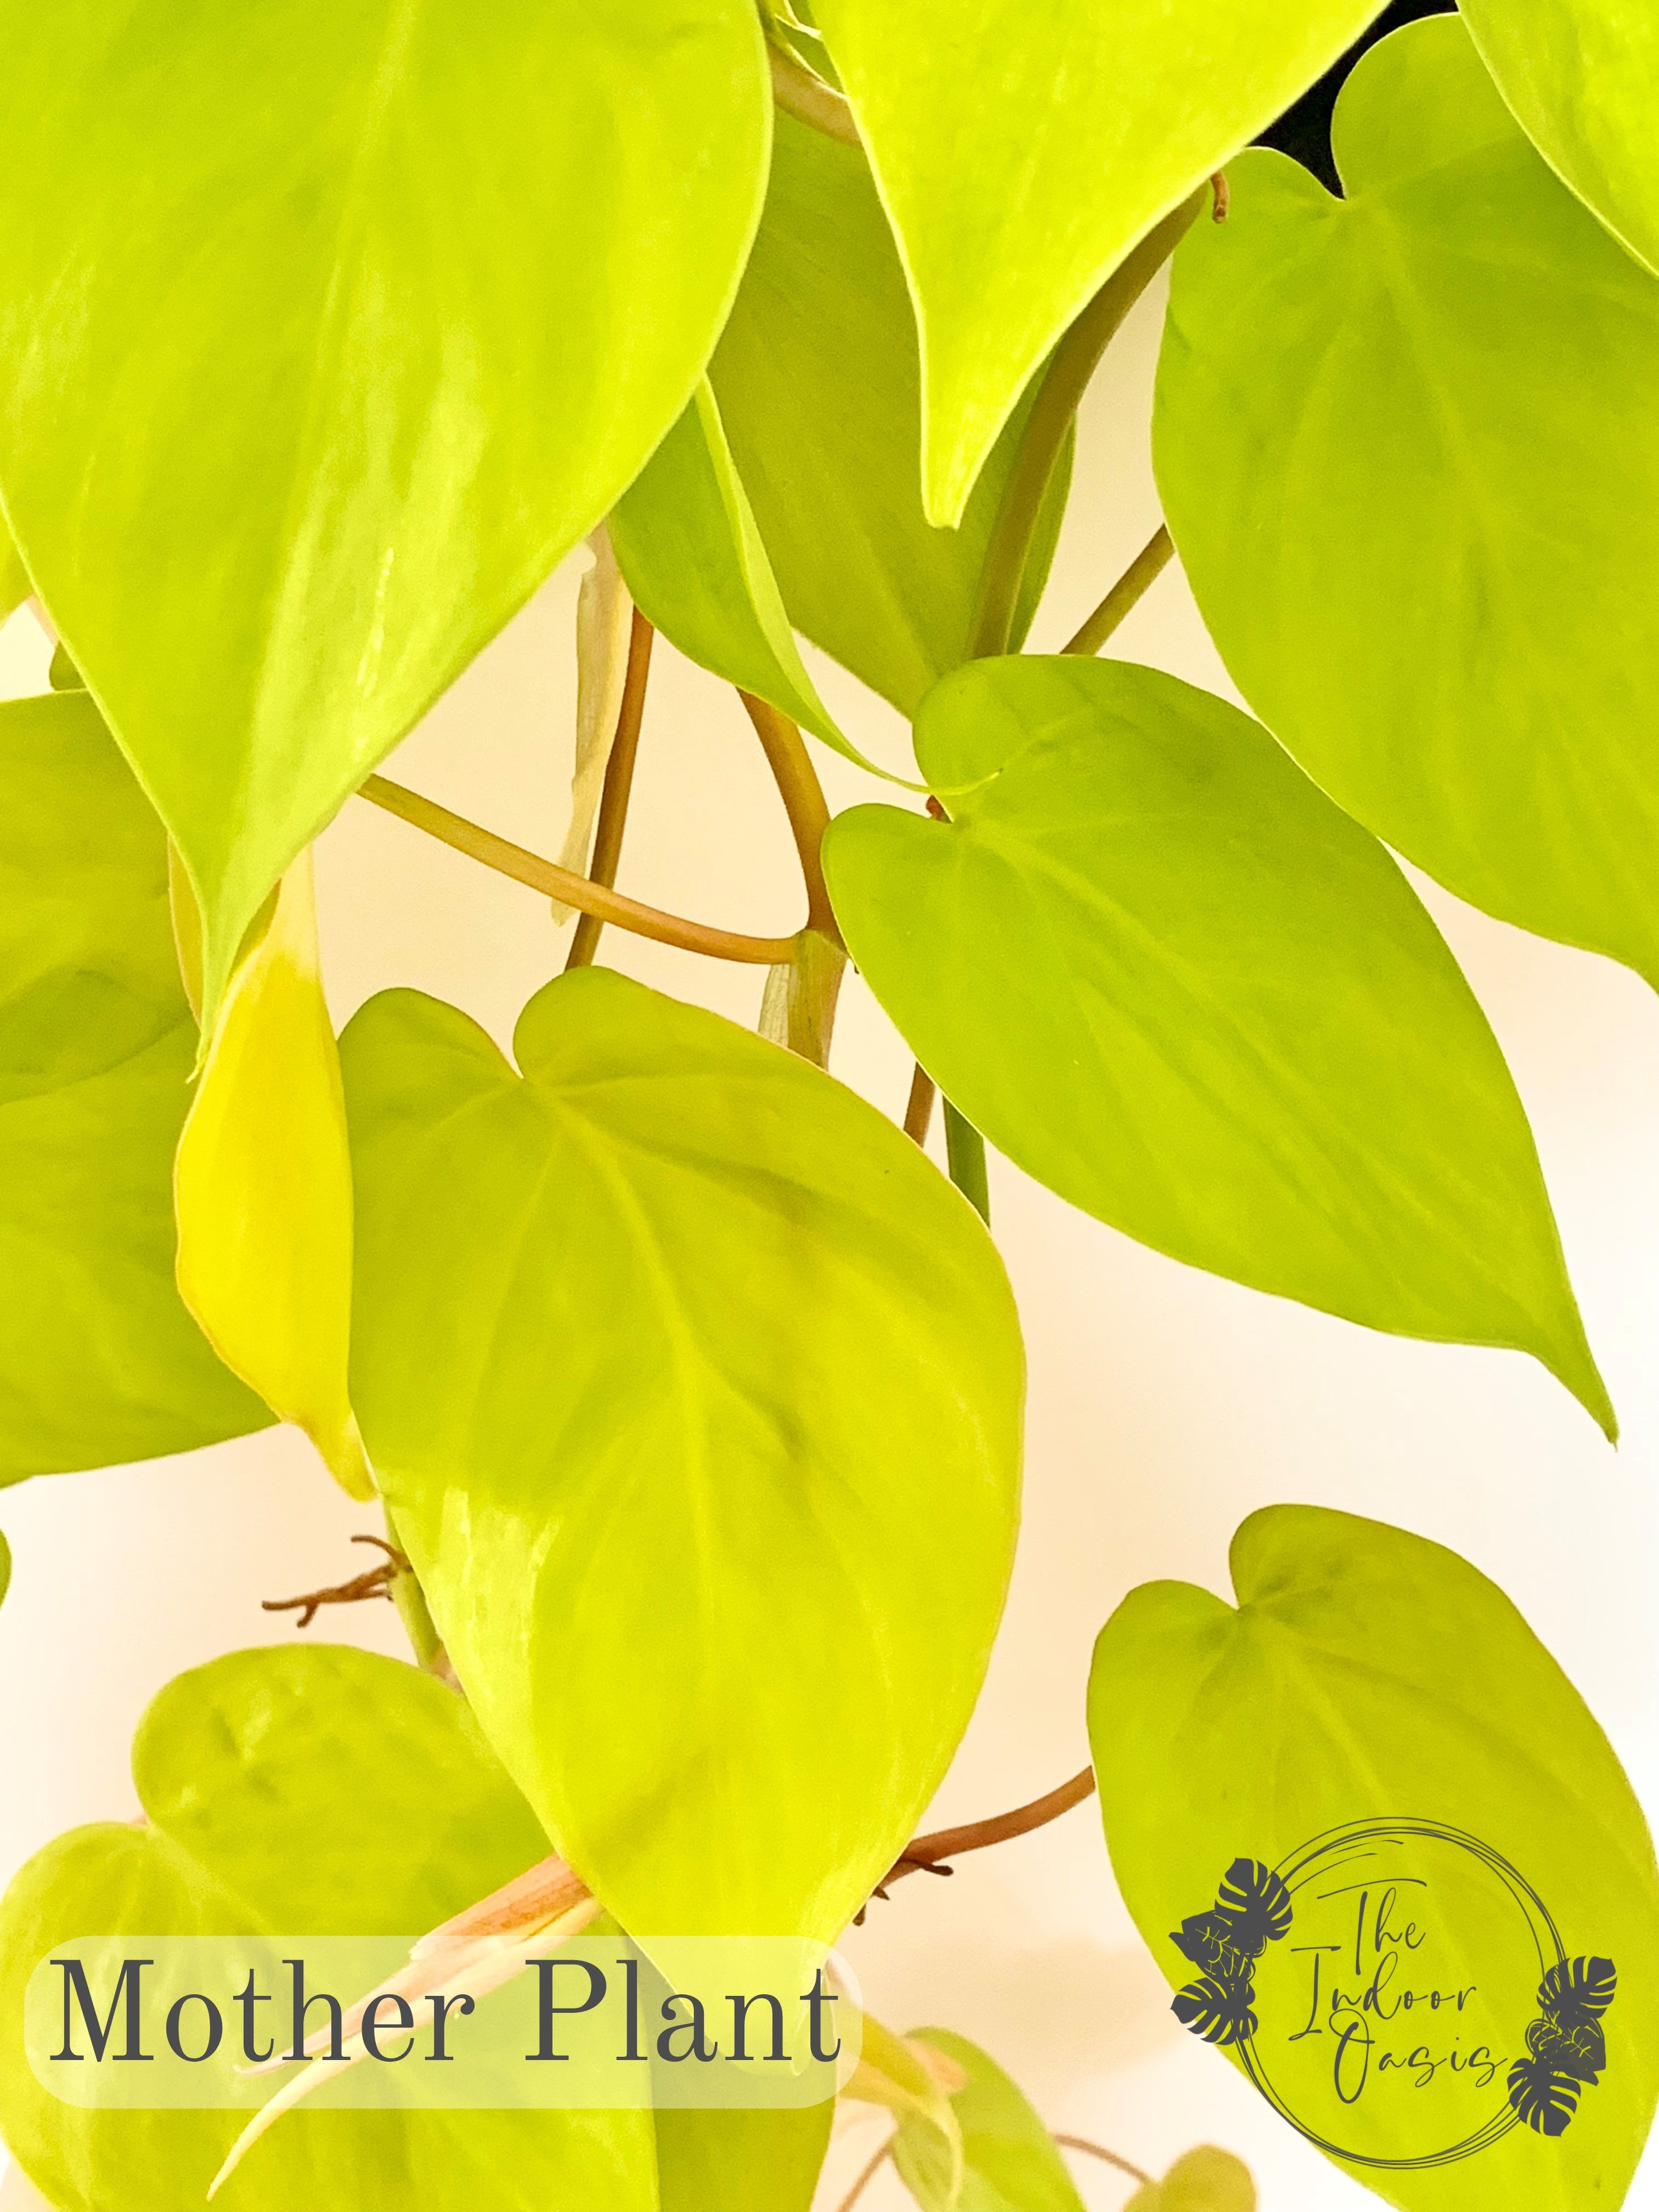 Philodendron Lemon Lime Mother Plant The Indoor Oasis NZ